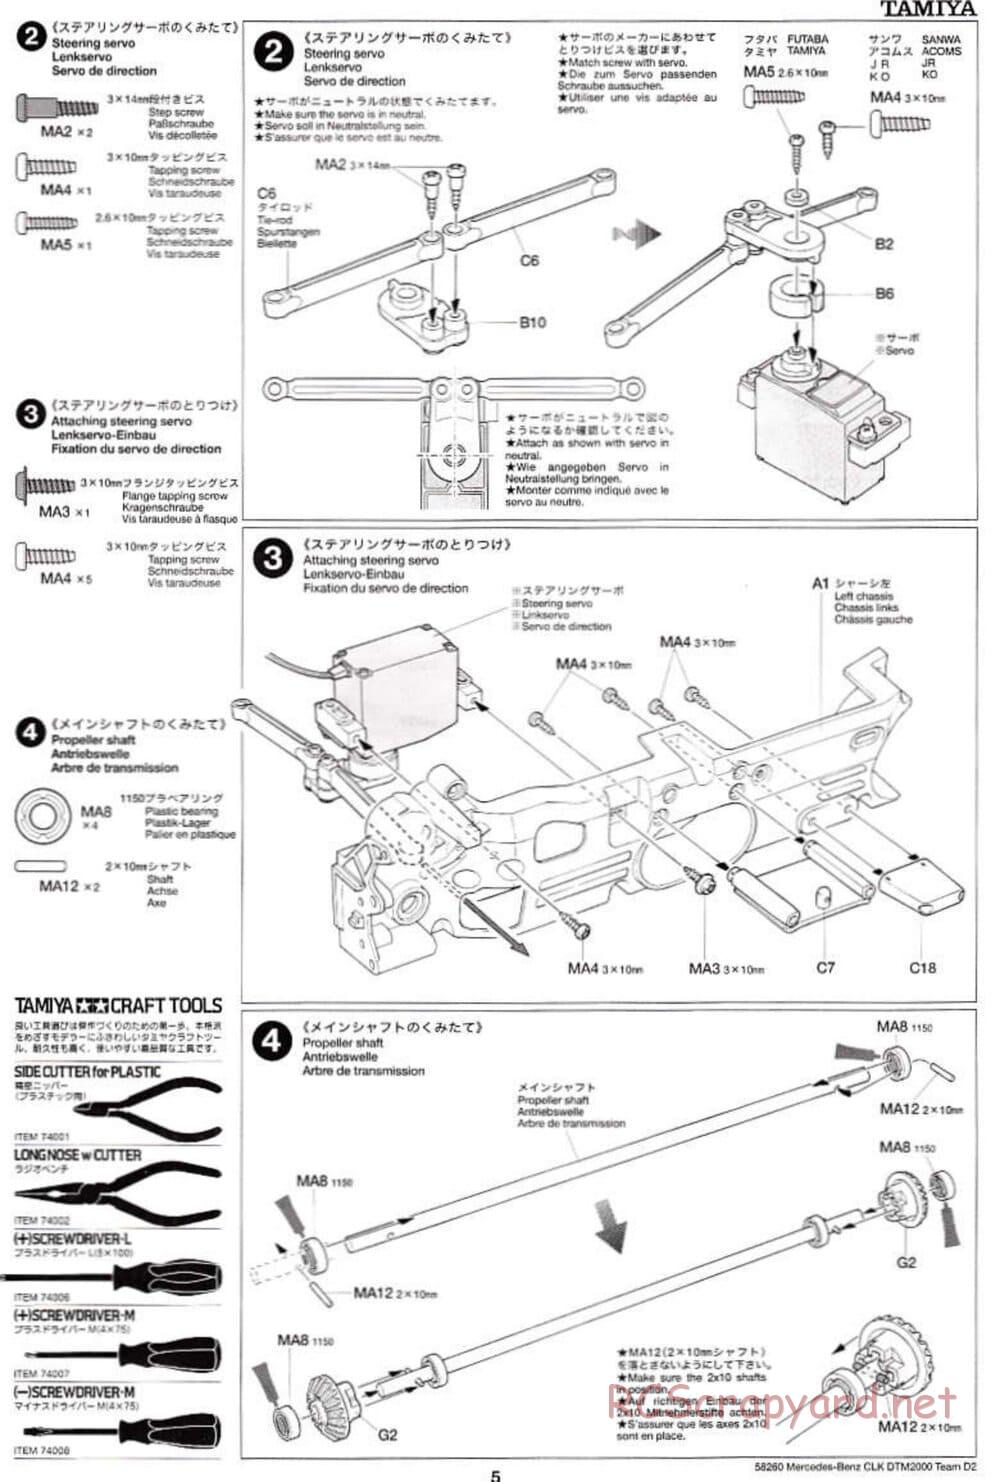 Tamiya - Mercedes Benz CLK DTM 2000 Team D2 - TL-01 Chassis - Manual - Page 5